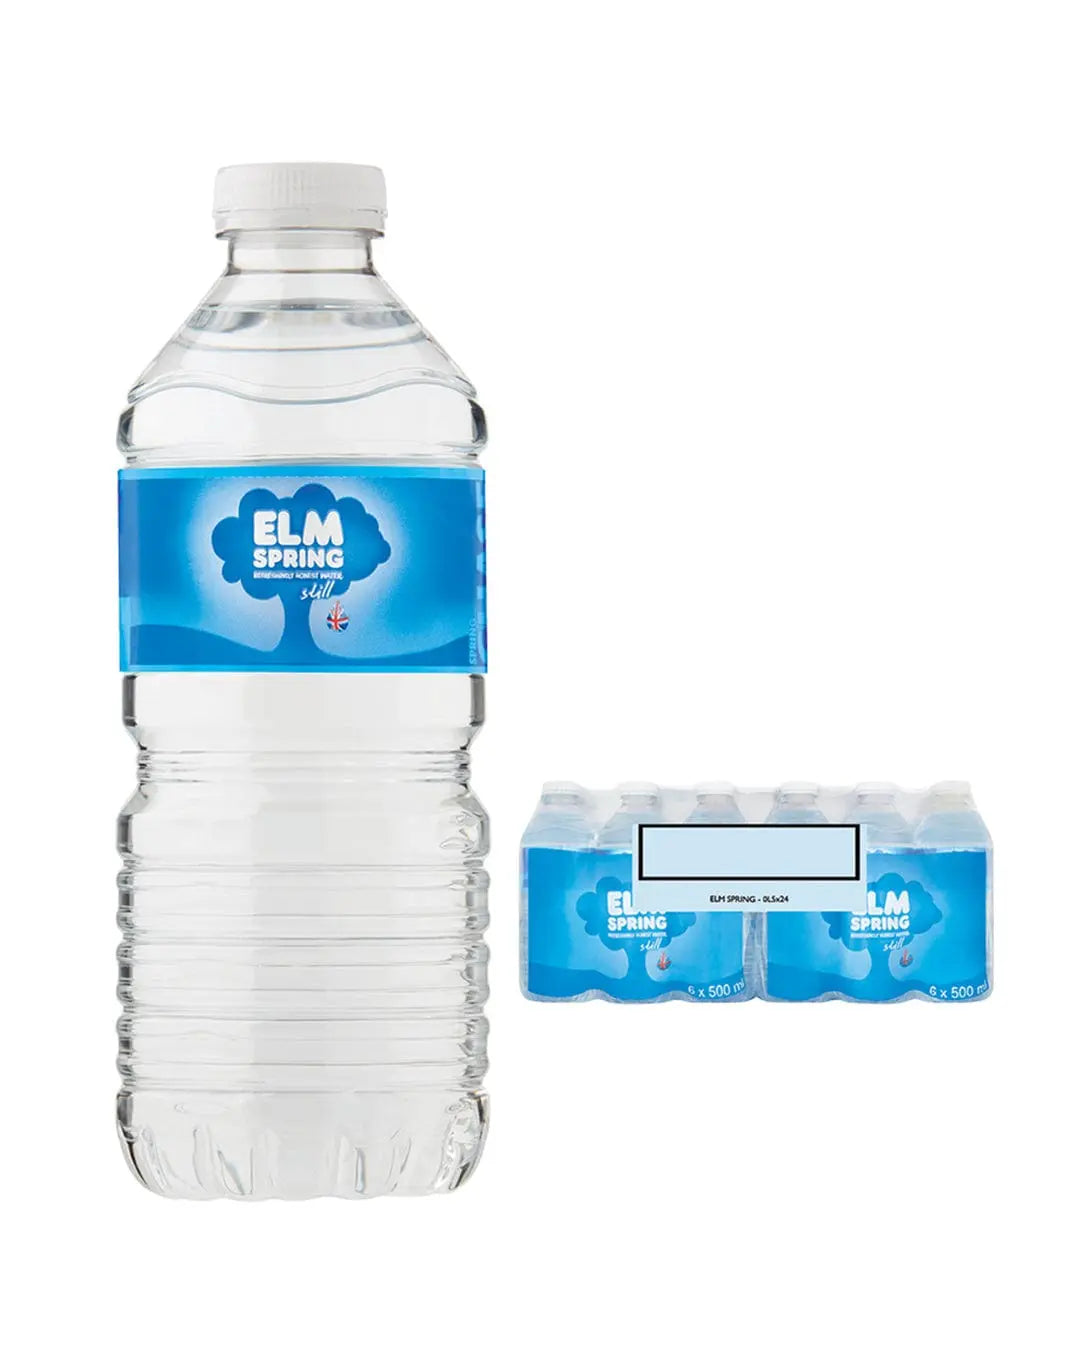 Elm Natural Spring Still Mineral Water Multipack, 24 x 500 ml Water